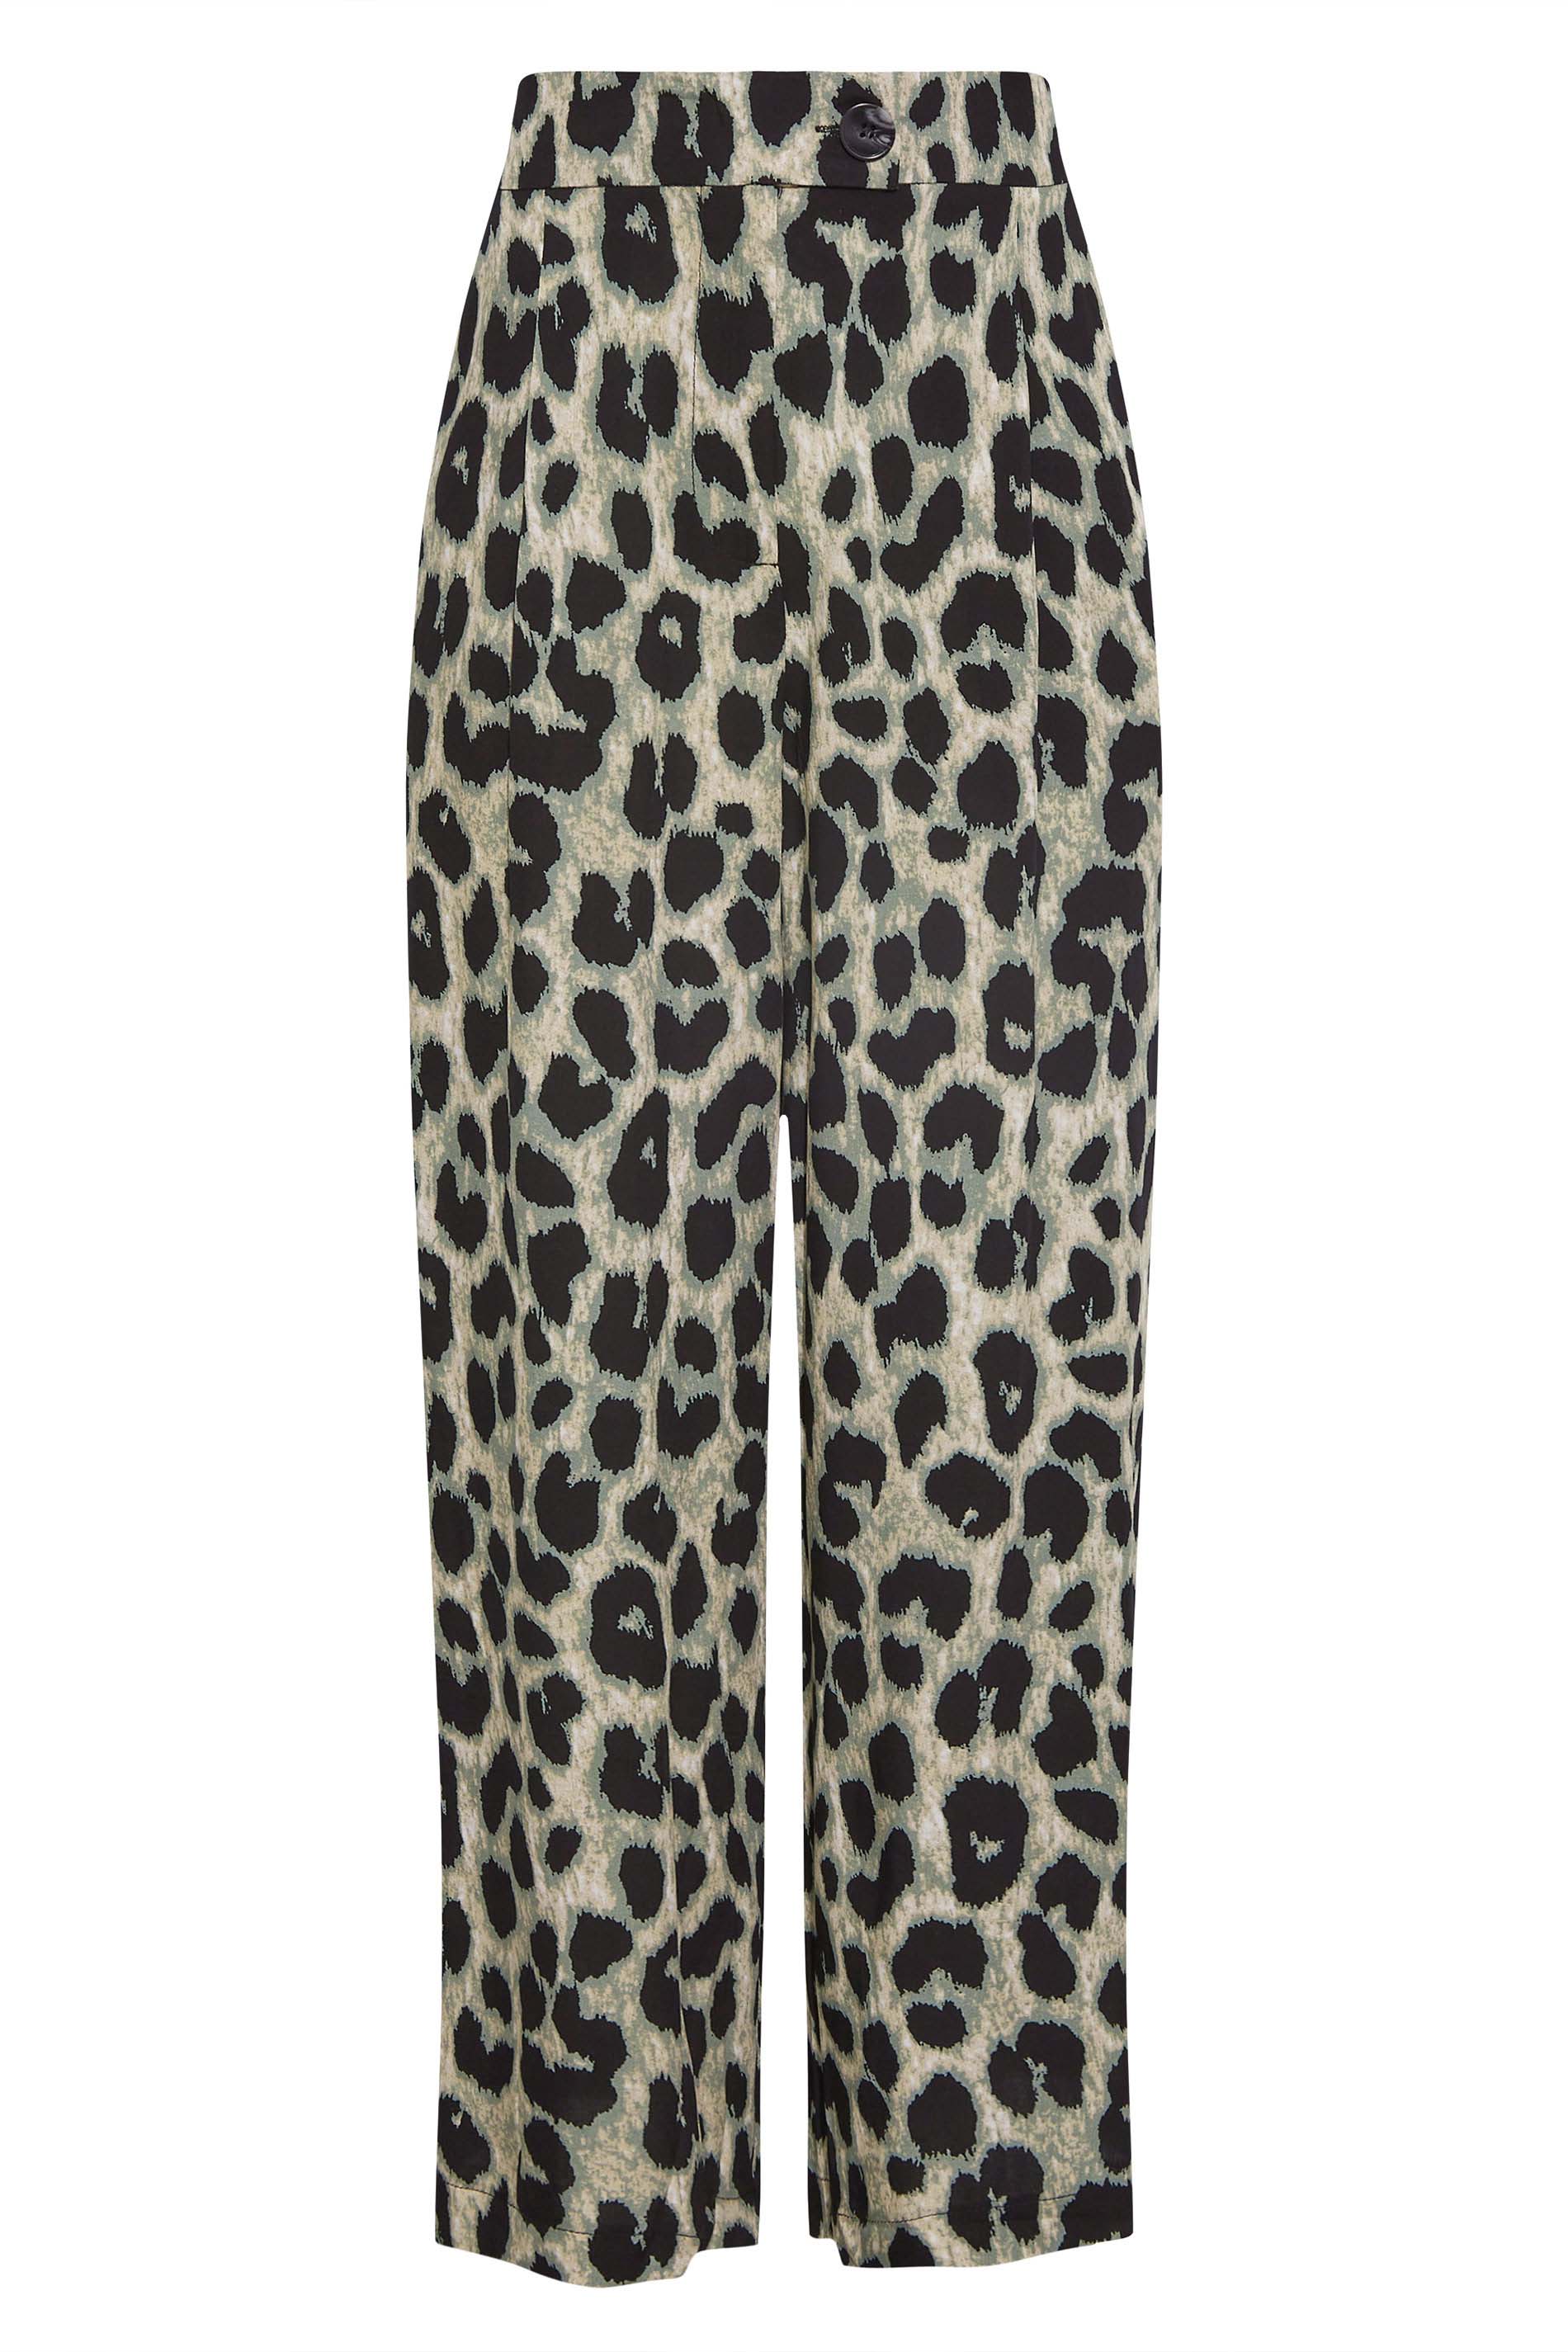 LTS Tall Women's Black Leopard Print Cropped Trousers | Long Tall Sally